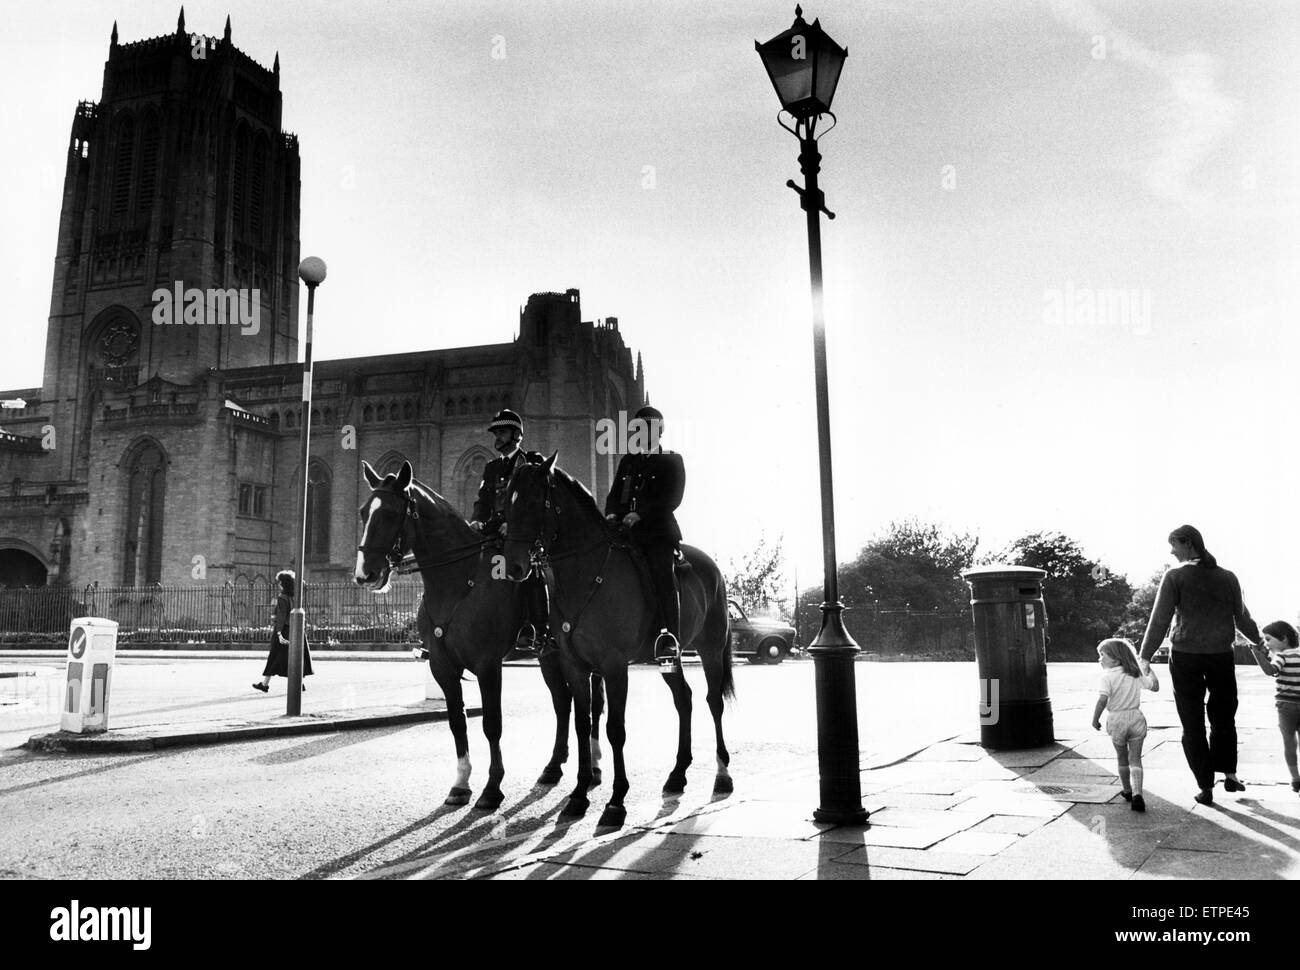 Police mounted on horses  patrol the area around Liverpool Anglican Cathedral. 6th September 1989. Stock Photo